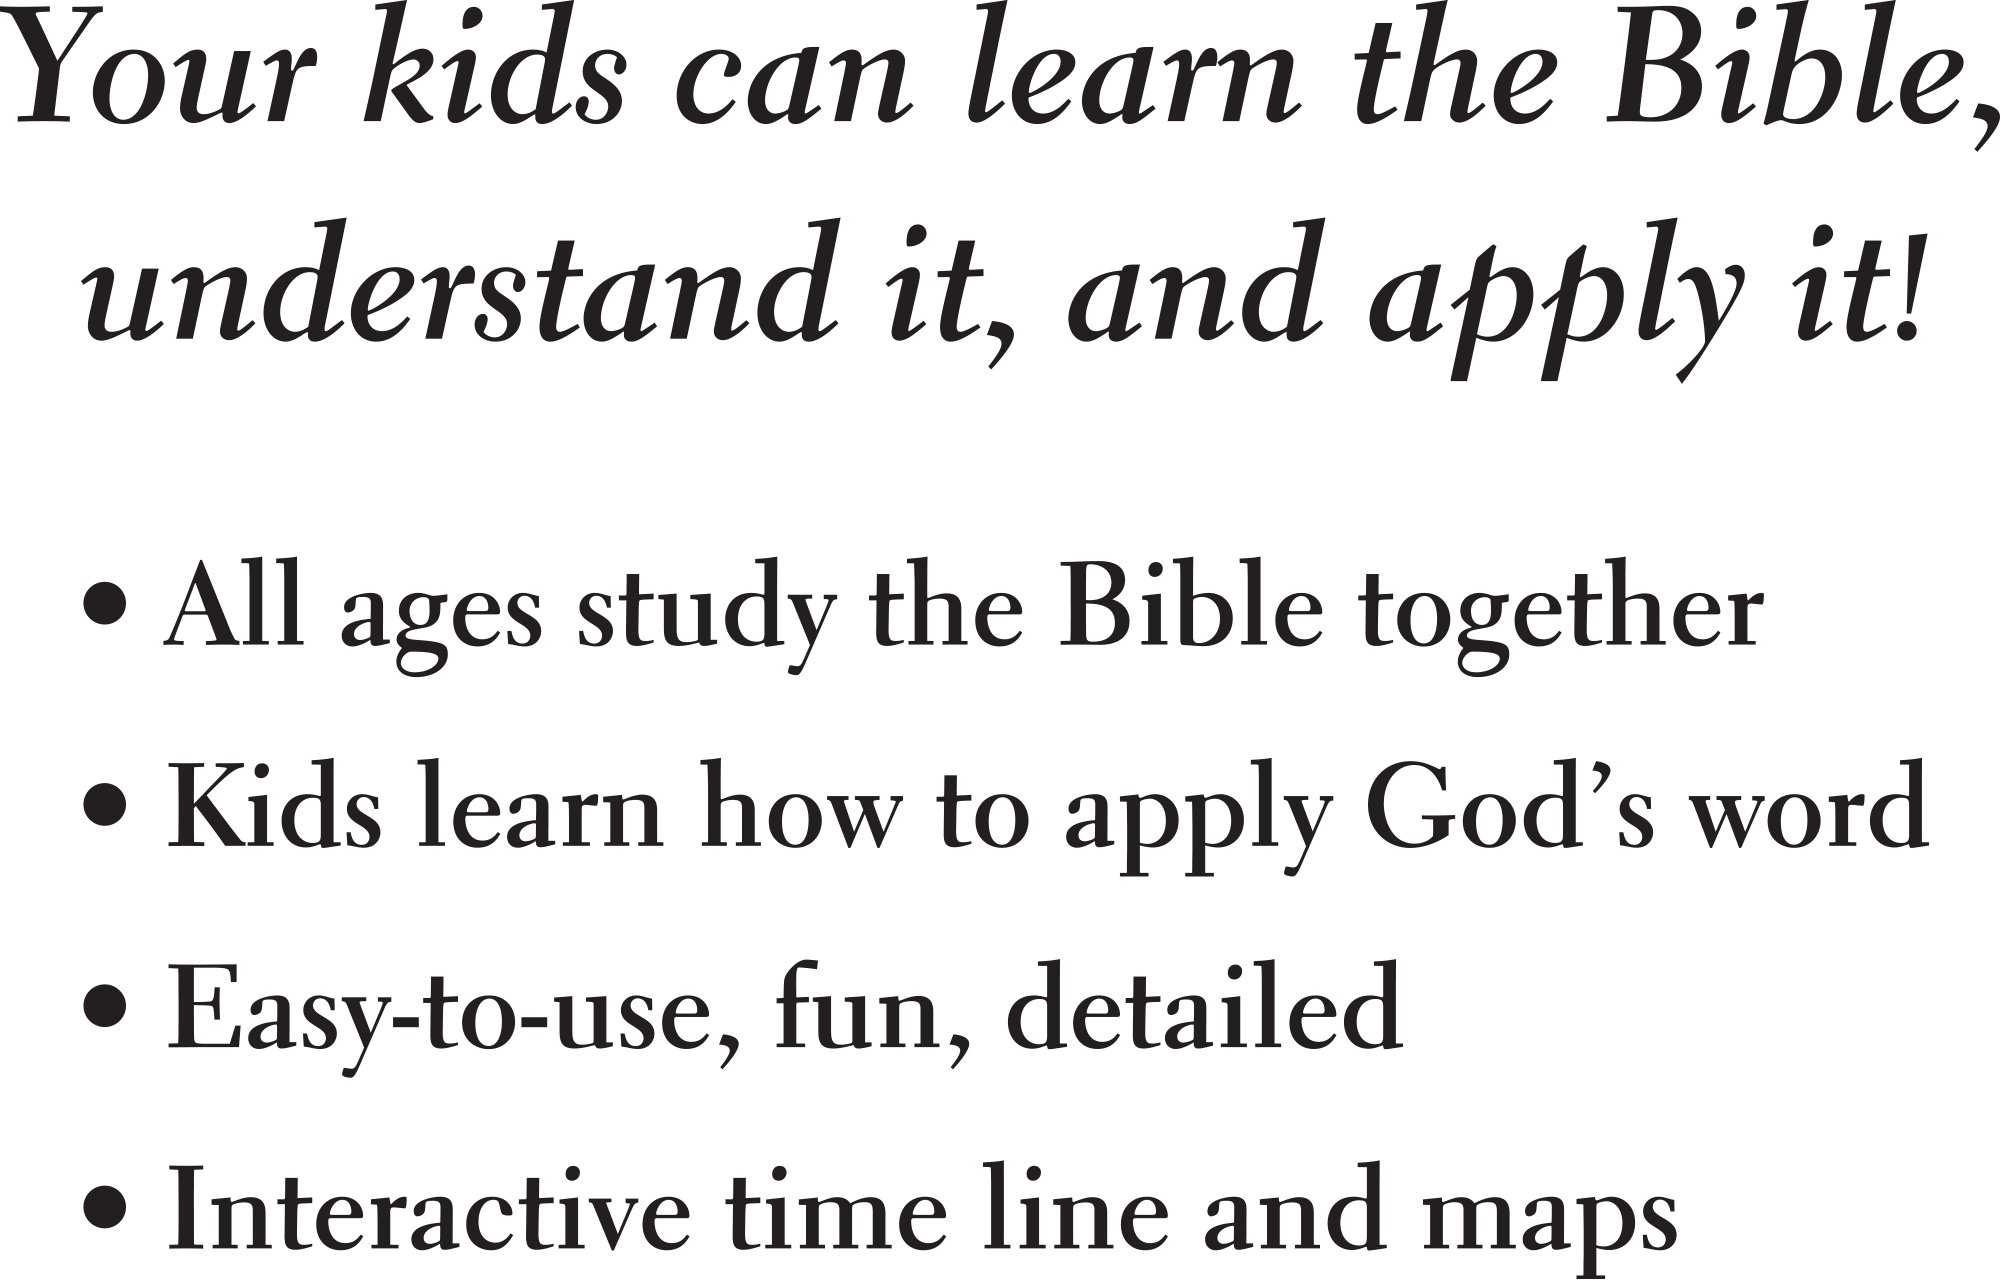 Your kids can learn the Bible, understand it, and apply it! All ages study the Bible together, Kids learn how to apply God’s word, Easy-to-use, fun, detailed, Interactive time line and maps!